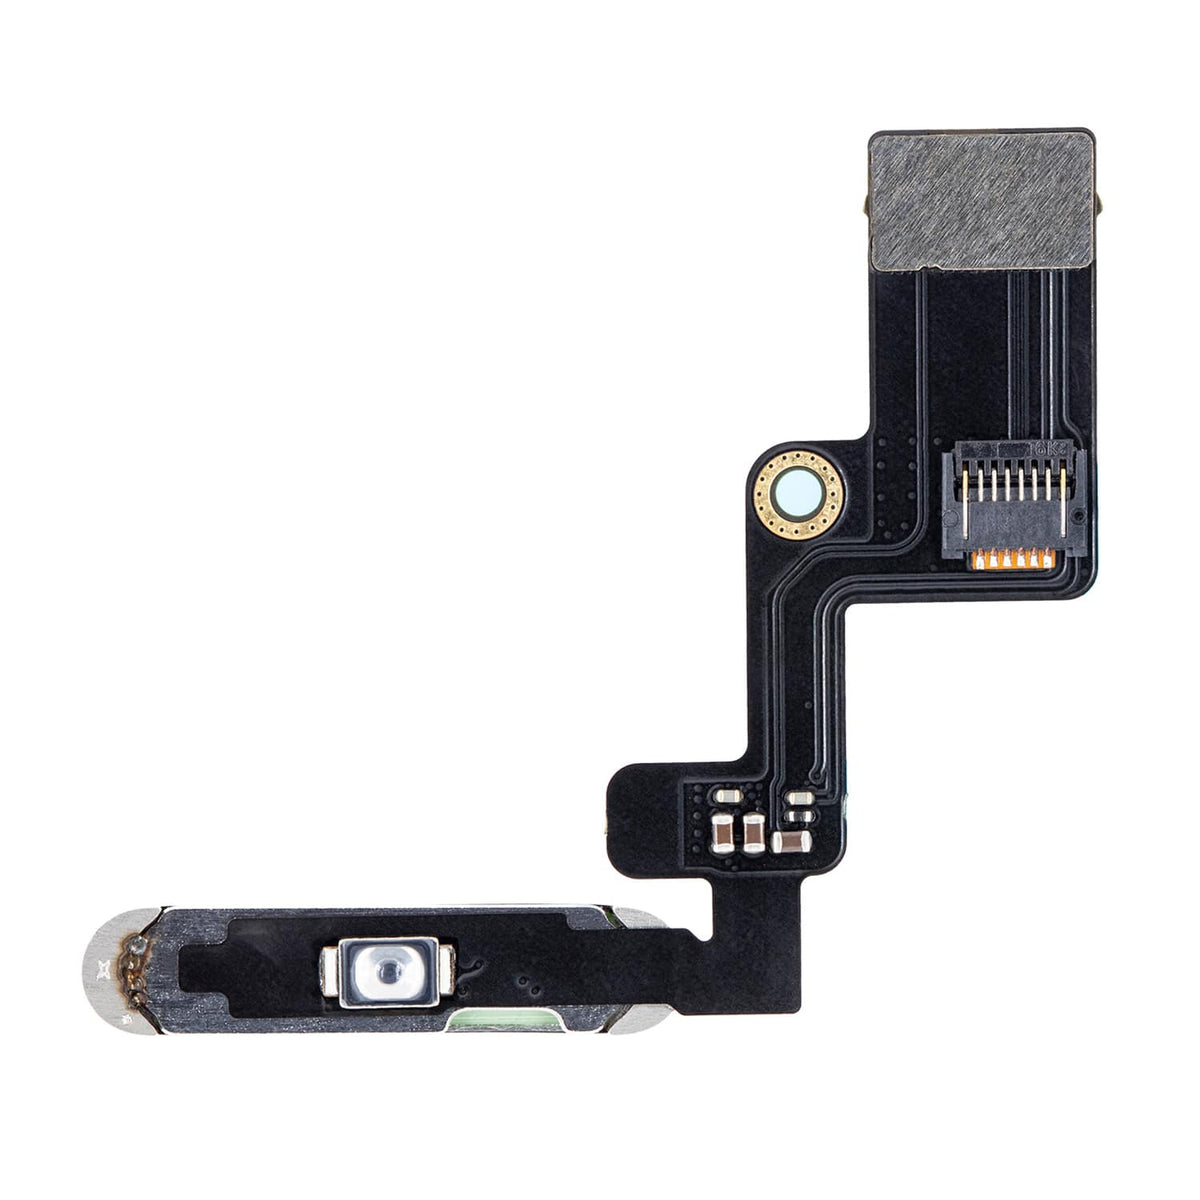 GREEN POWER BUTTON WITH FLEX CABLE FOR IPAD AIR 4/5